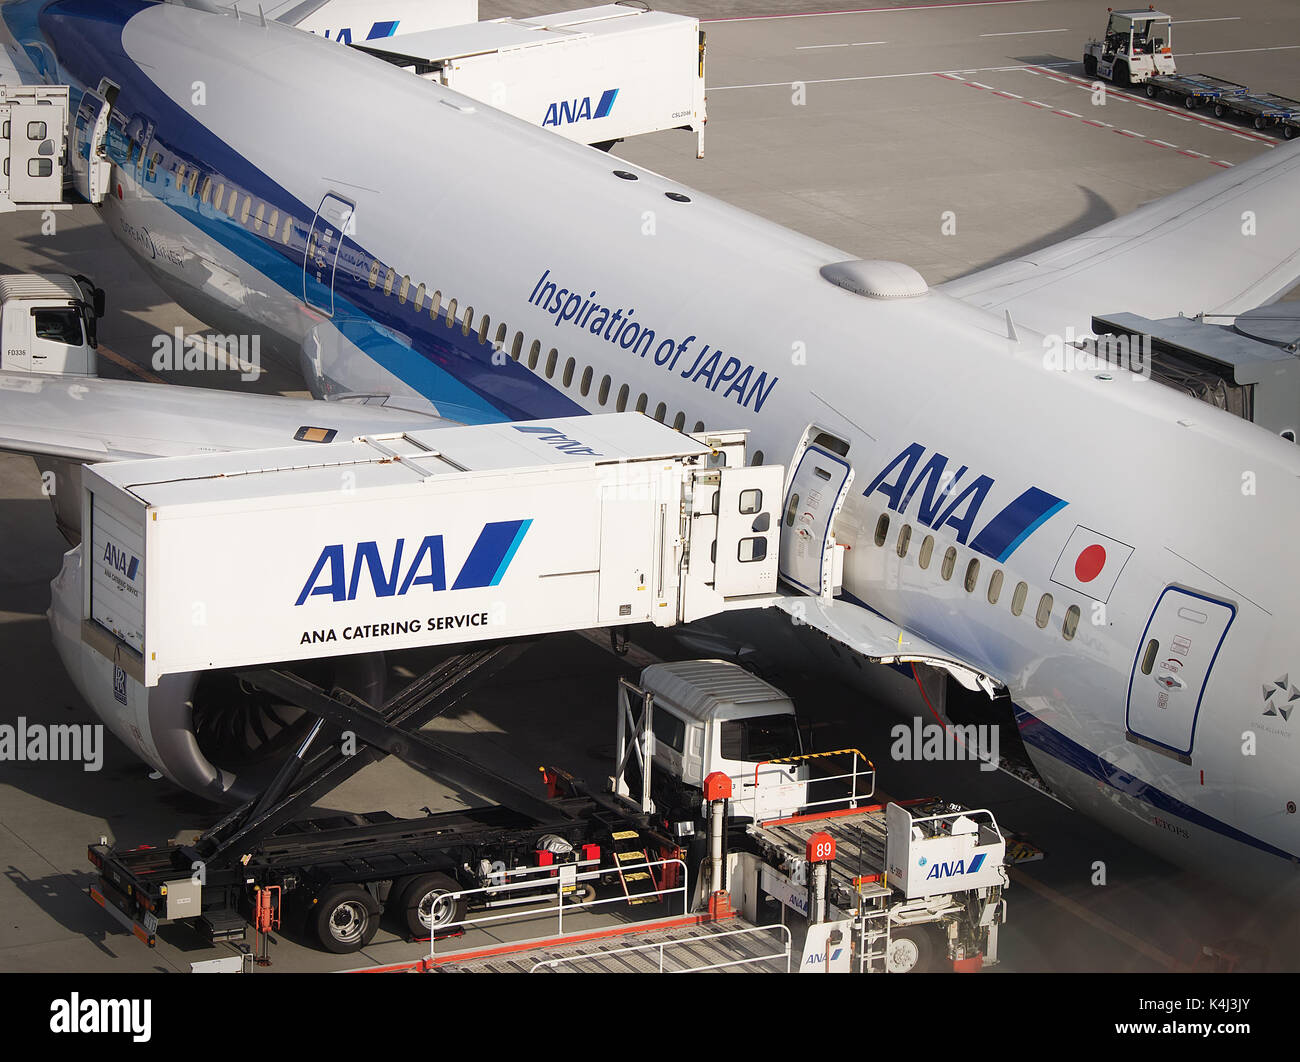 ANA Catering Service loading for ANA Boeing 787 Dreamliner at New Chitose Airport apron, Hokkaido, Japan Stock Photo